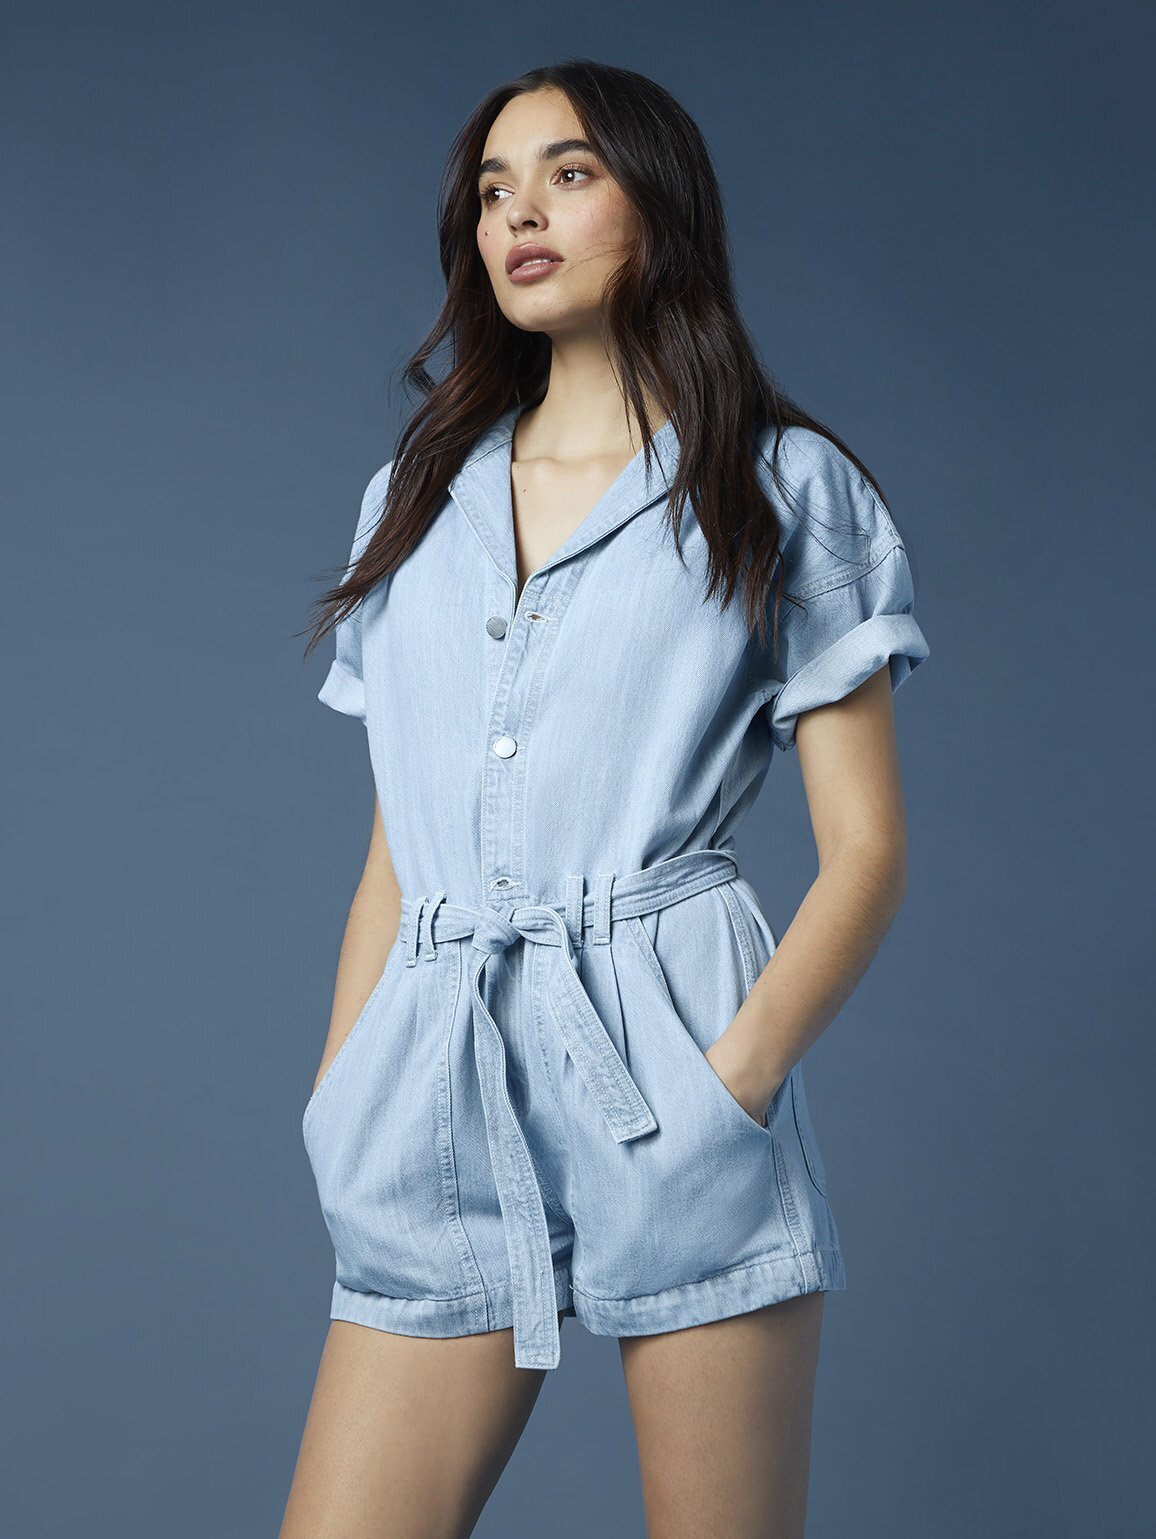 Our 9 Favorite Denim Dresses & Jumpsuits For Summer - The Good Trade